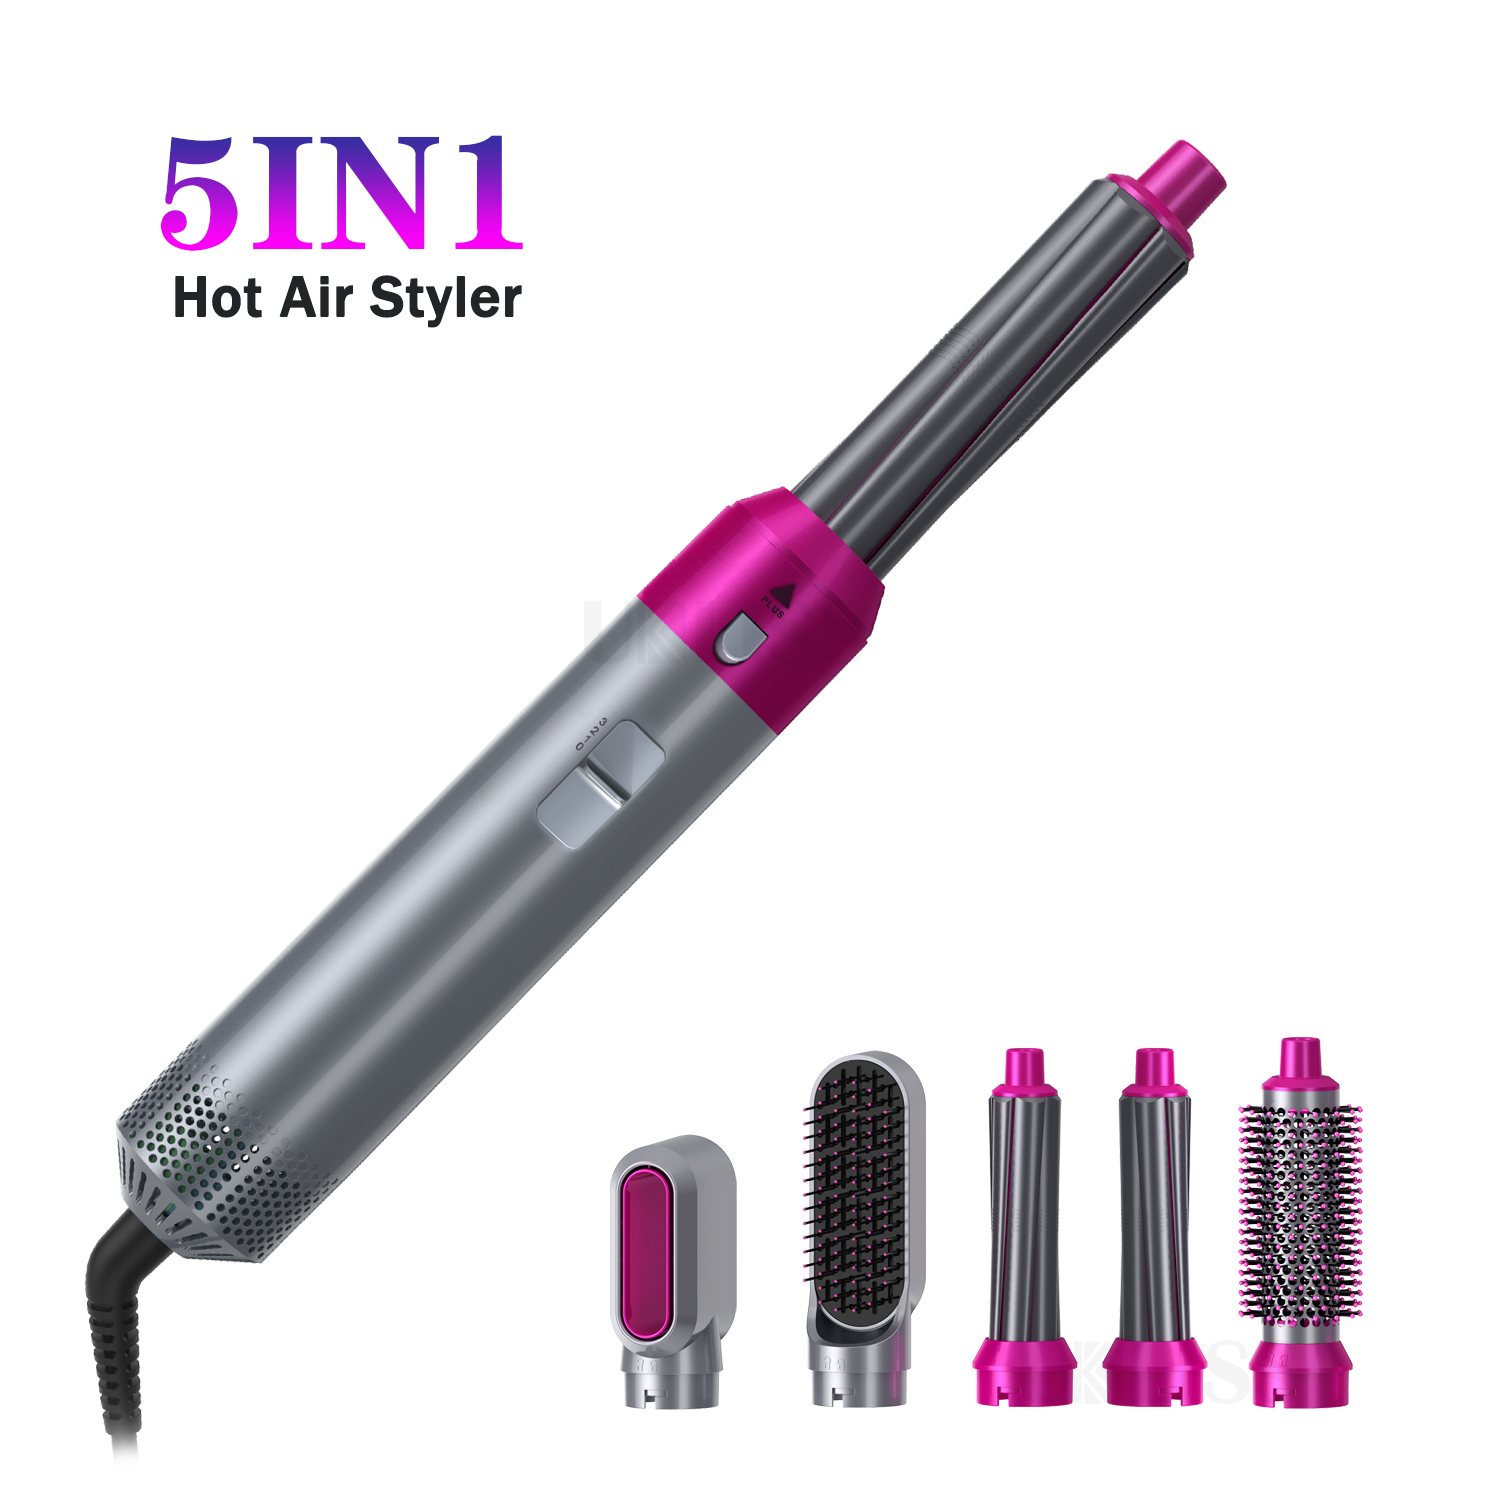 

Electric Dryer Hair Curling Wand Detachable 5 In 1 Kit Hair Styling Tools Blow Dryer Hot Air Brush Styler Volumizer Hair Straightener Curler Comb